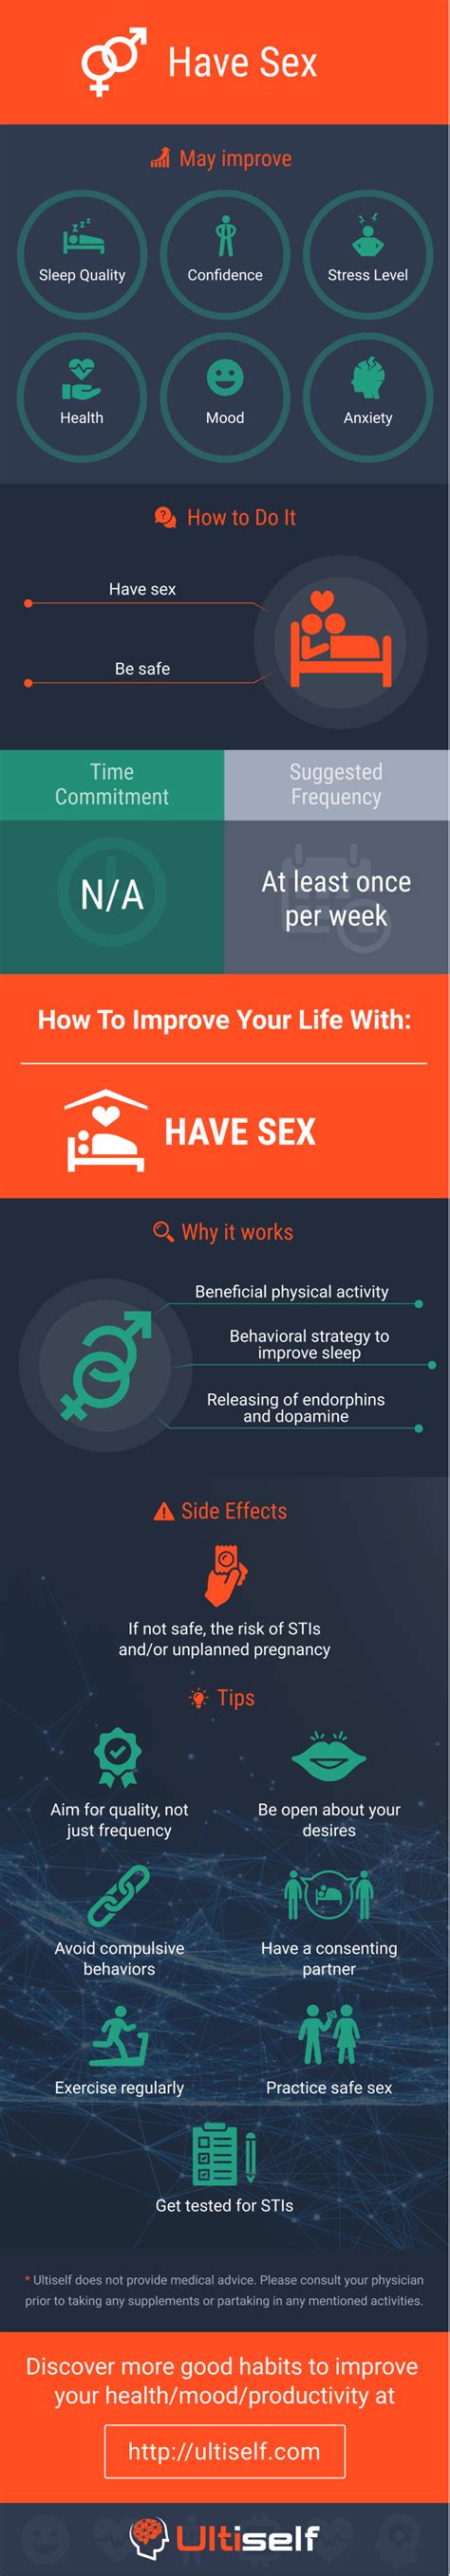 how having sex can improve your life ultiself habits